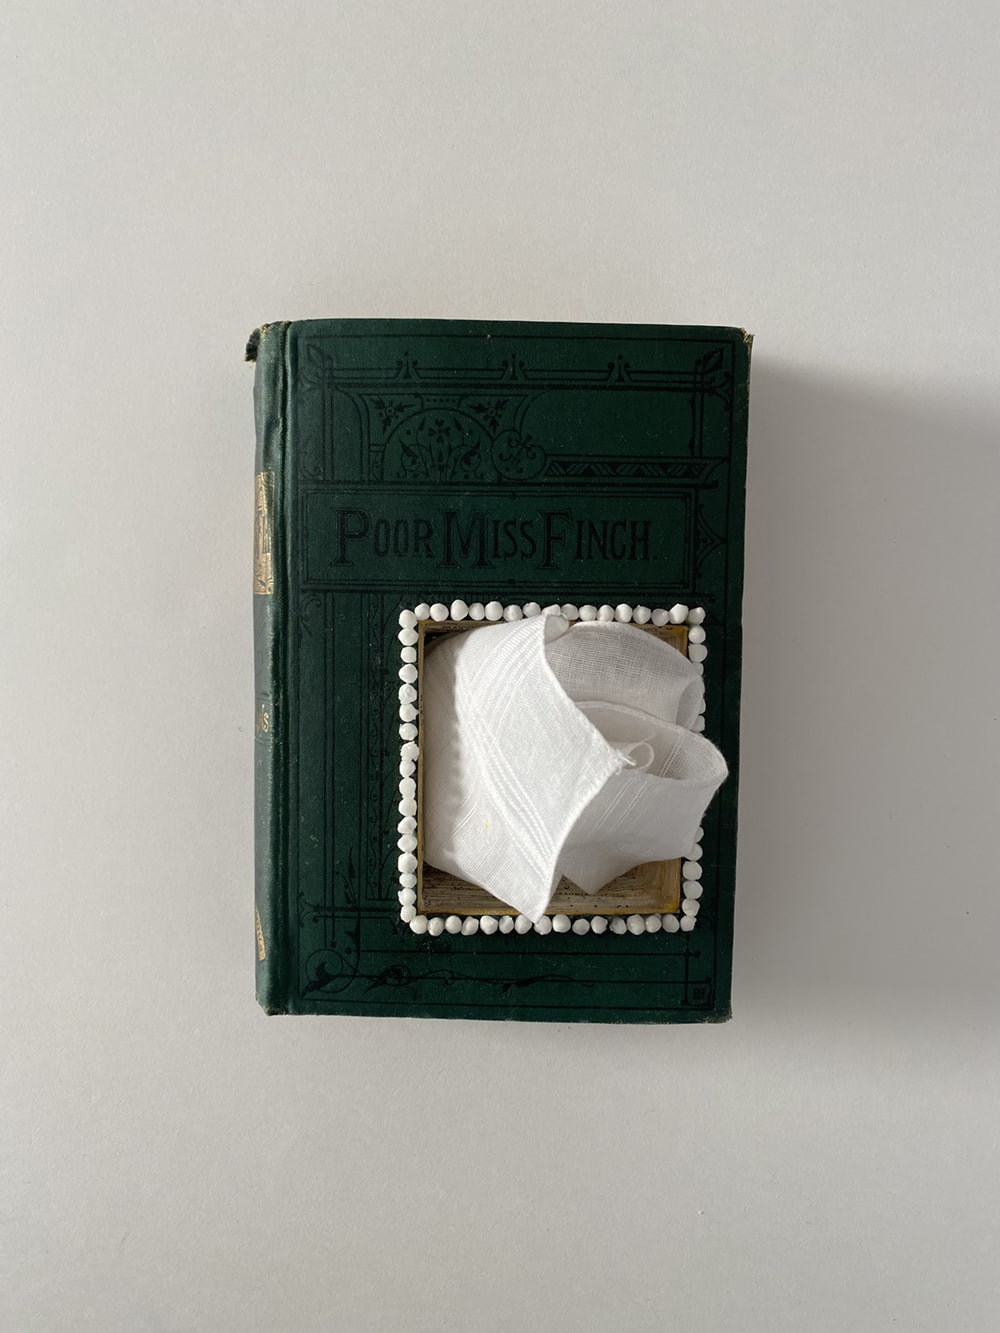 tissue book project Poor Miss Finch